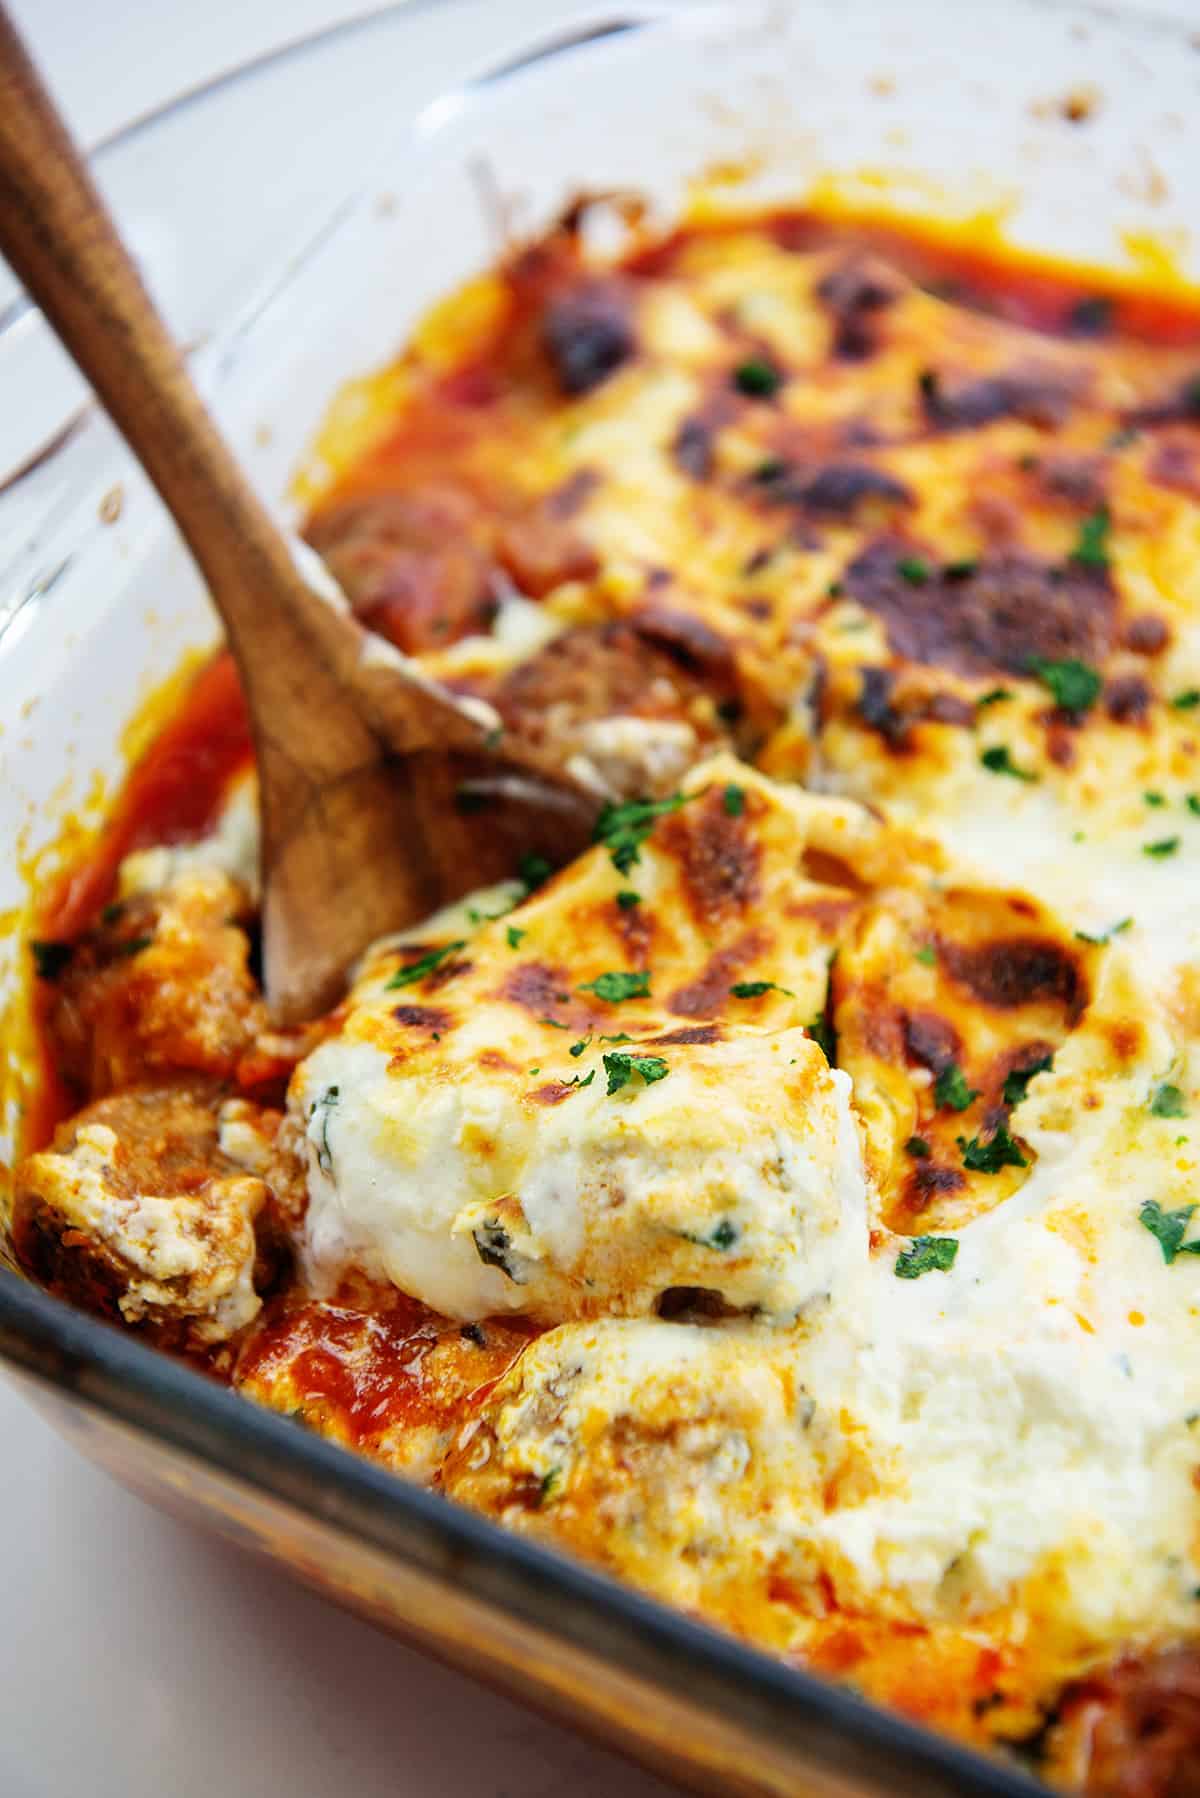 spoon full of cheesy meatballs in glass baking dish.